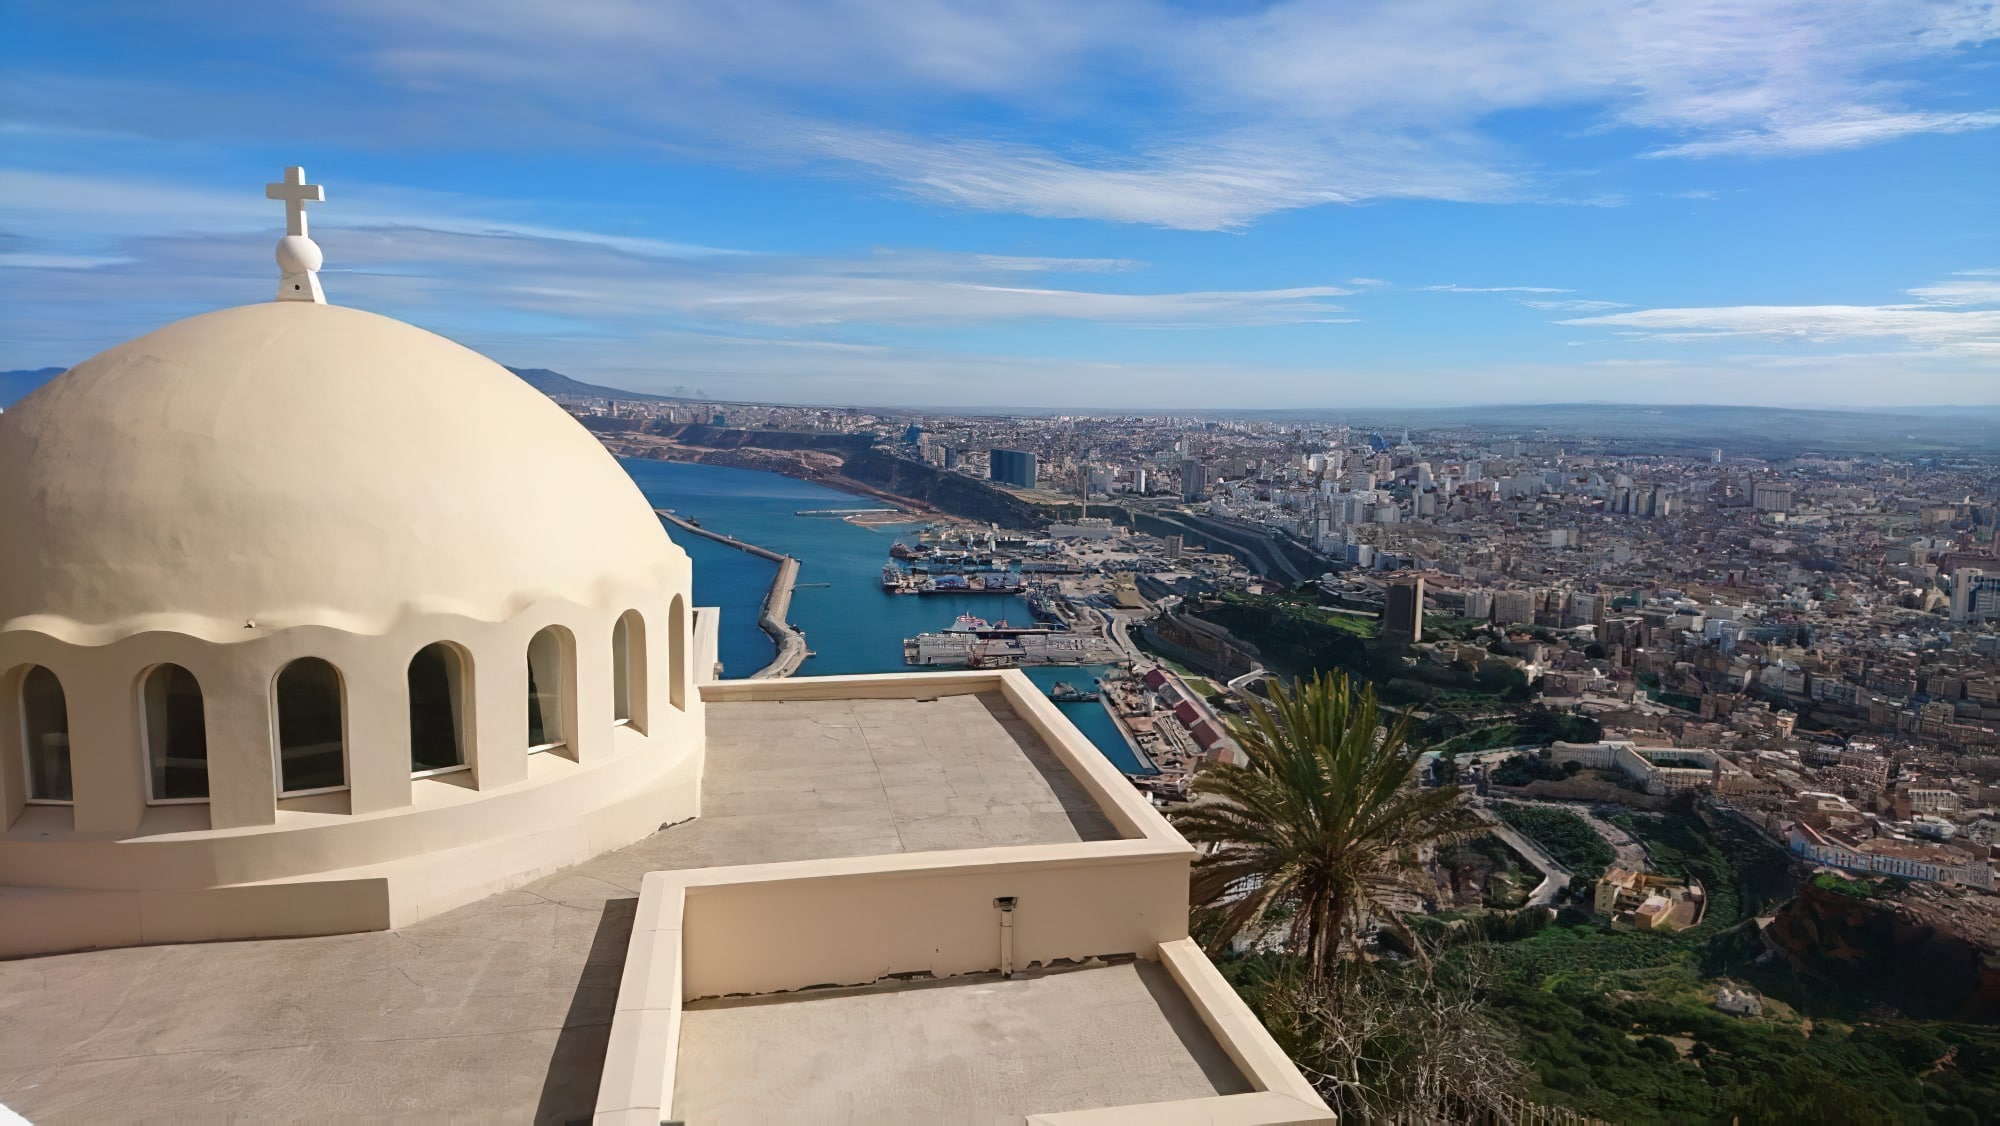 The 5 essential things to do in Oran, Algeria